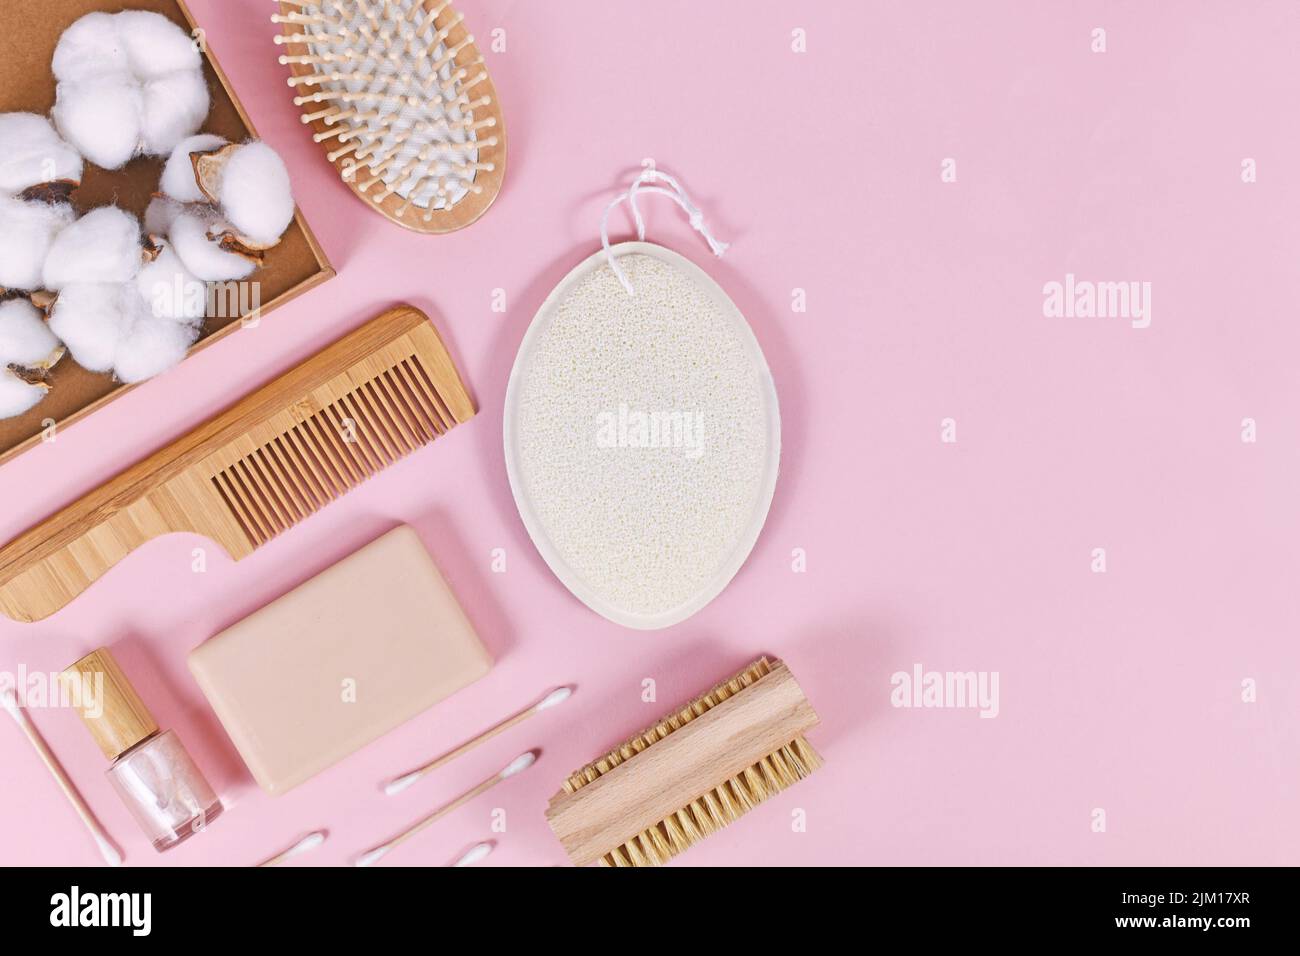 Eco friendly wooden beauty and hygiene products like comb and soap on pink background Stock Photo